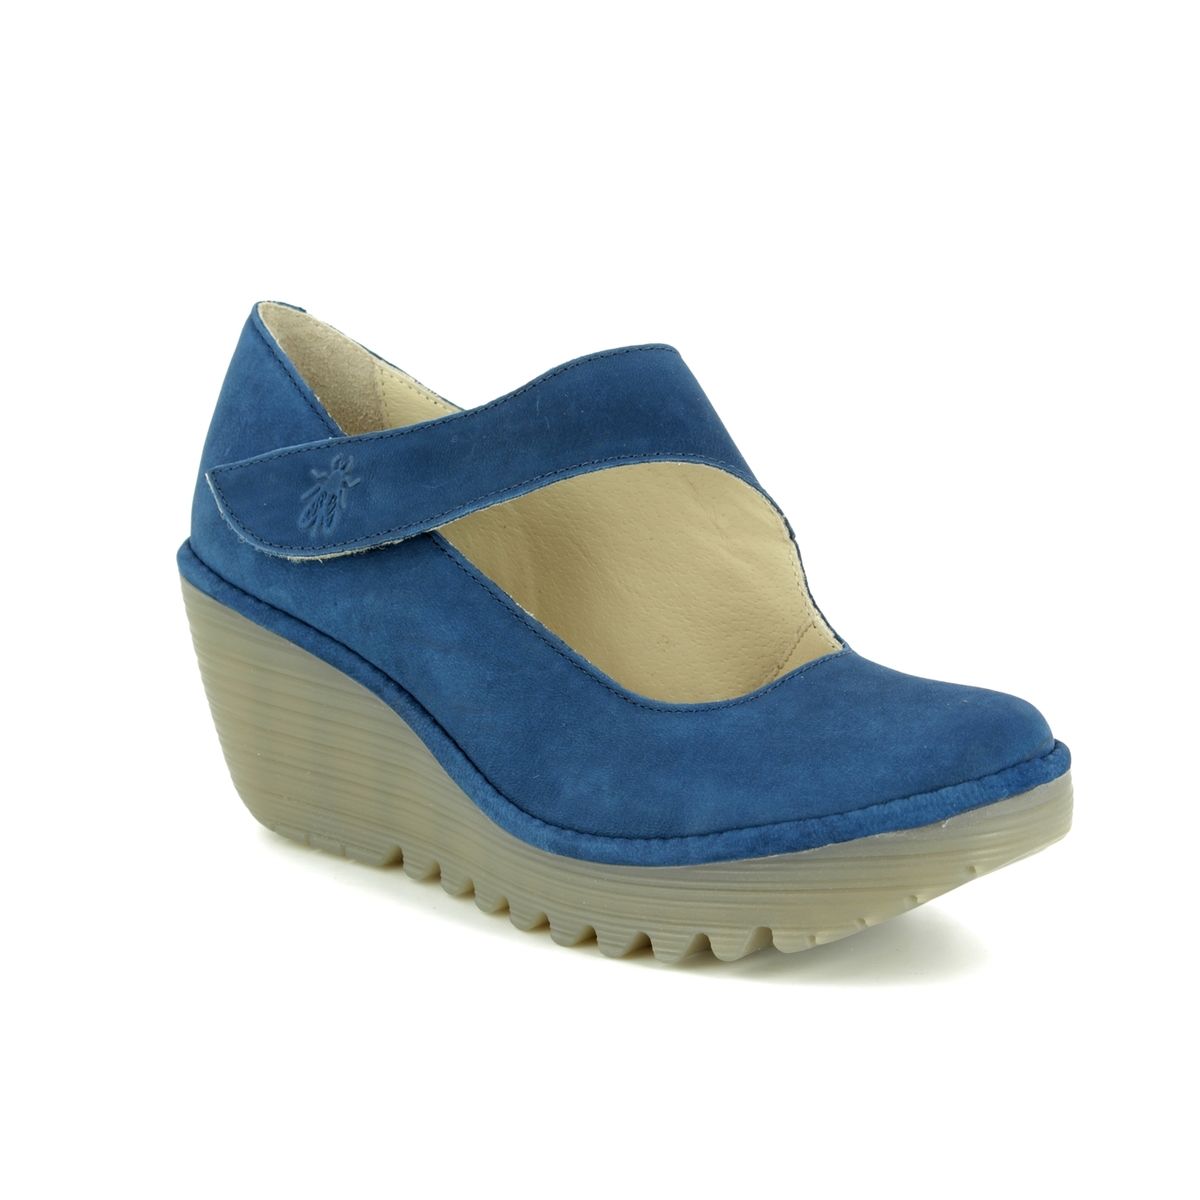 blue fly london shoes